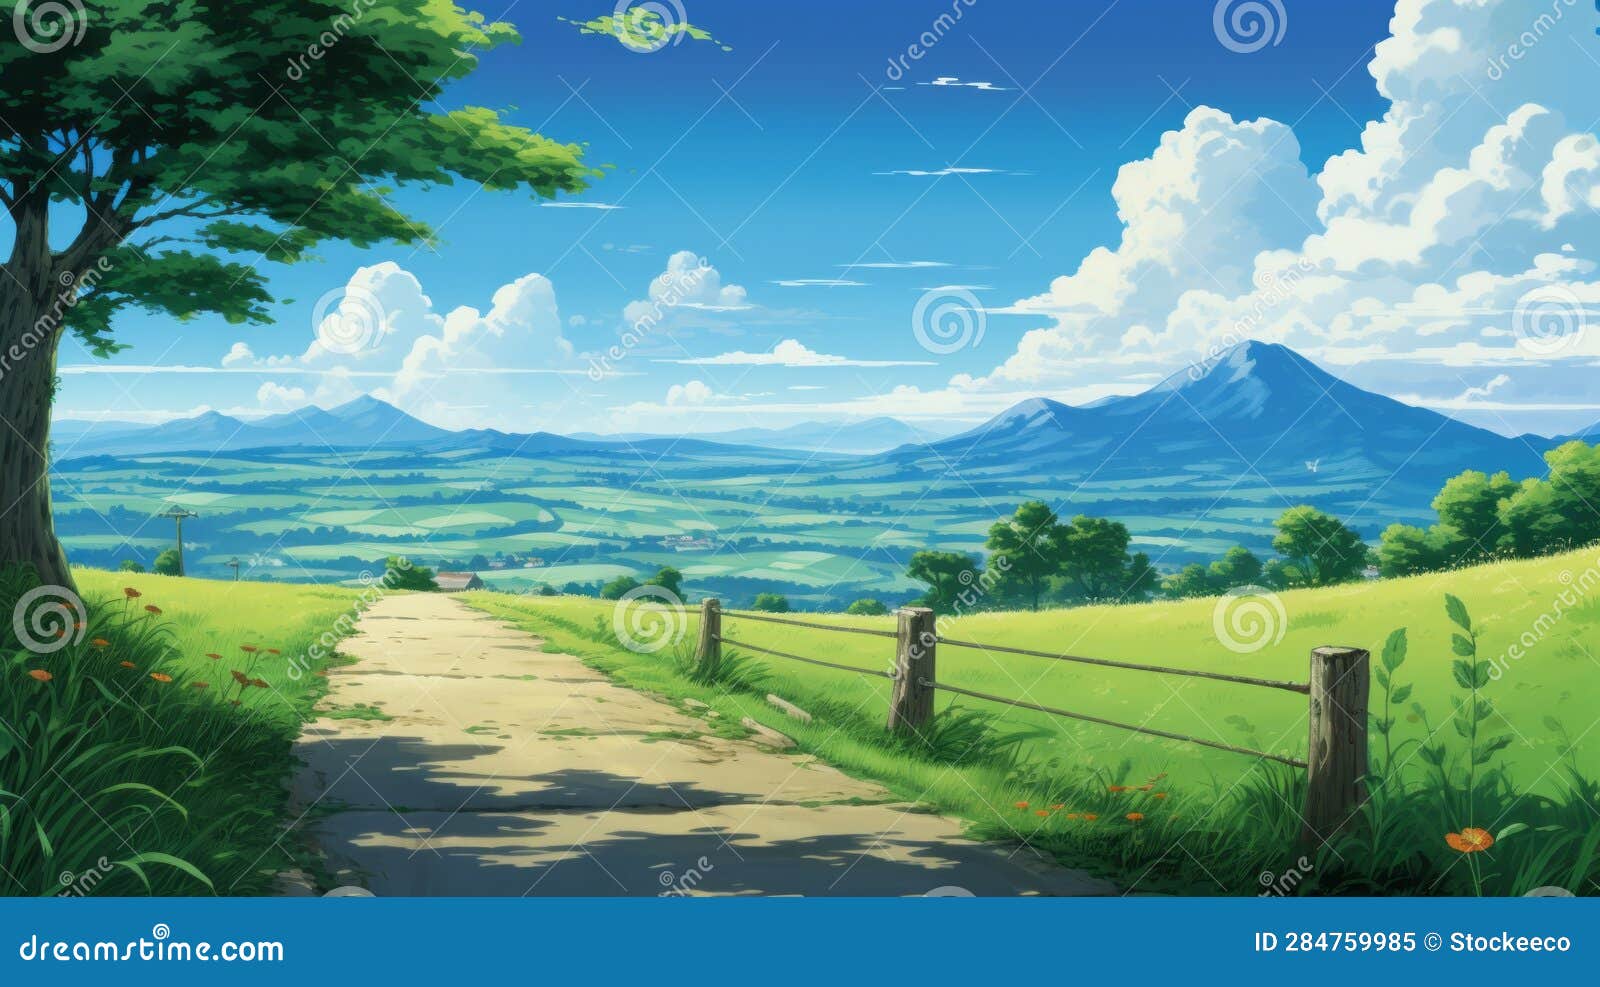 Anime Backgrounds Mountain Stock Photos and Images - 123RF